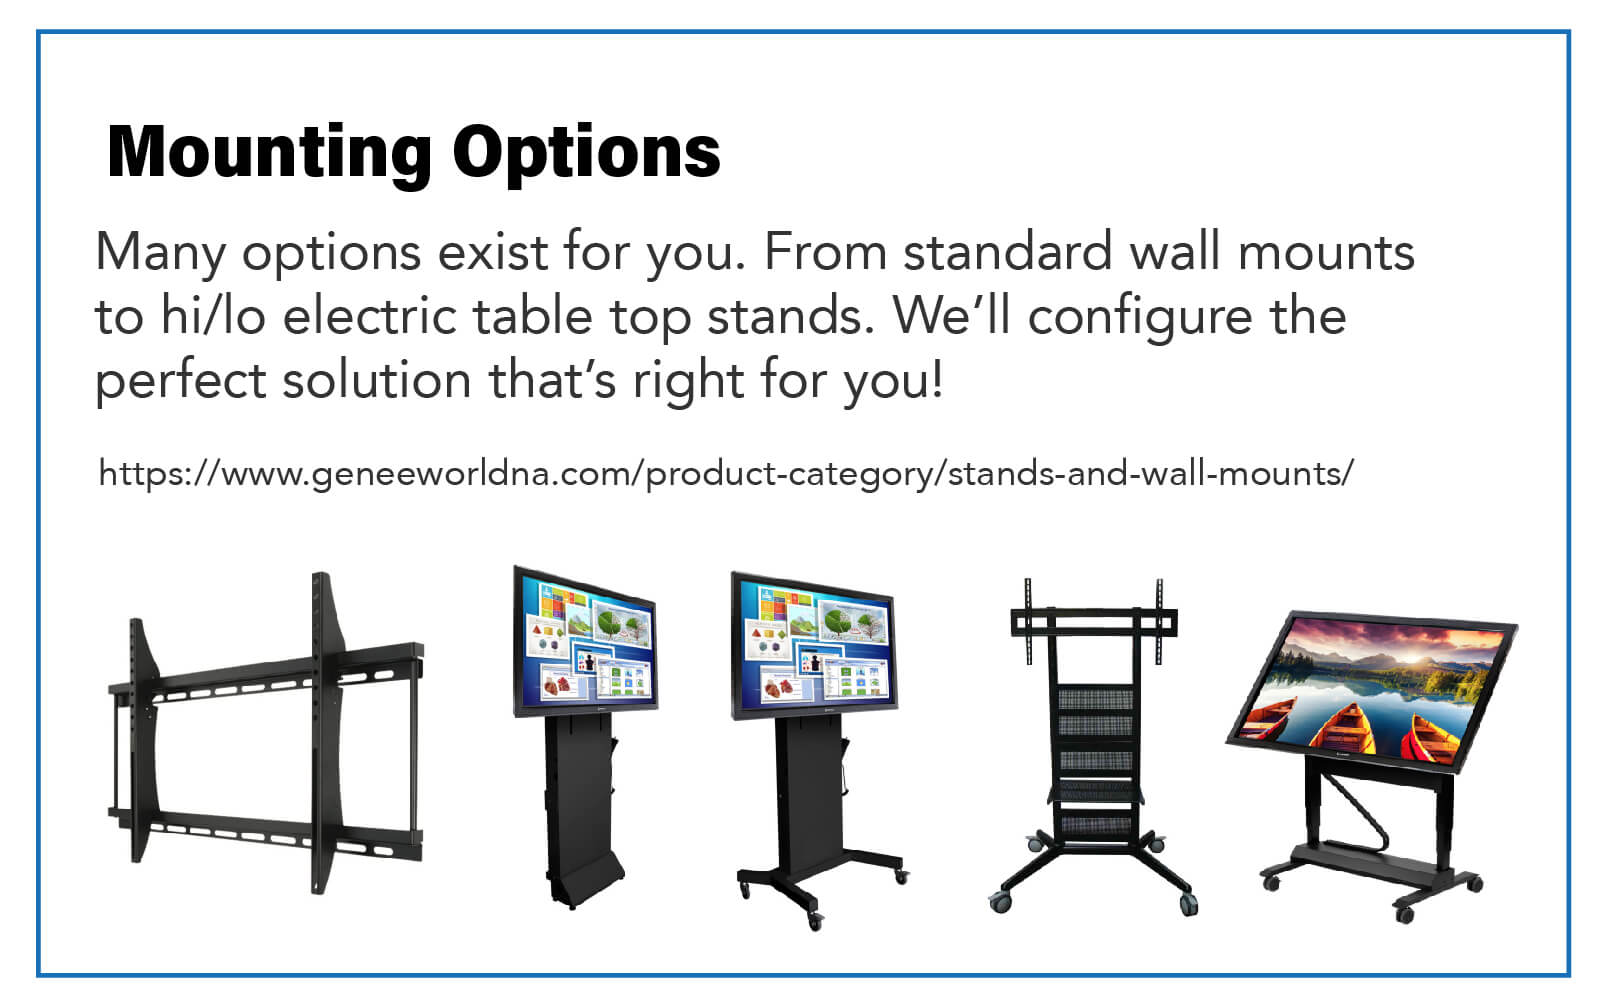 Mounting Options: Many options exist for you.  From standard wall mounts to hi/lo electric table top stands. We'll configure the perfect solution that's right for you!